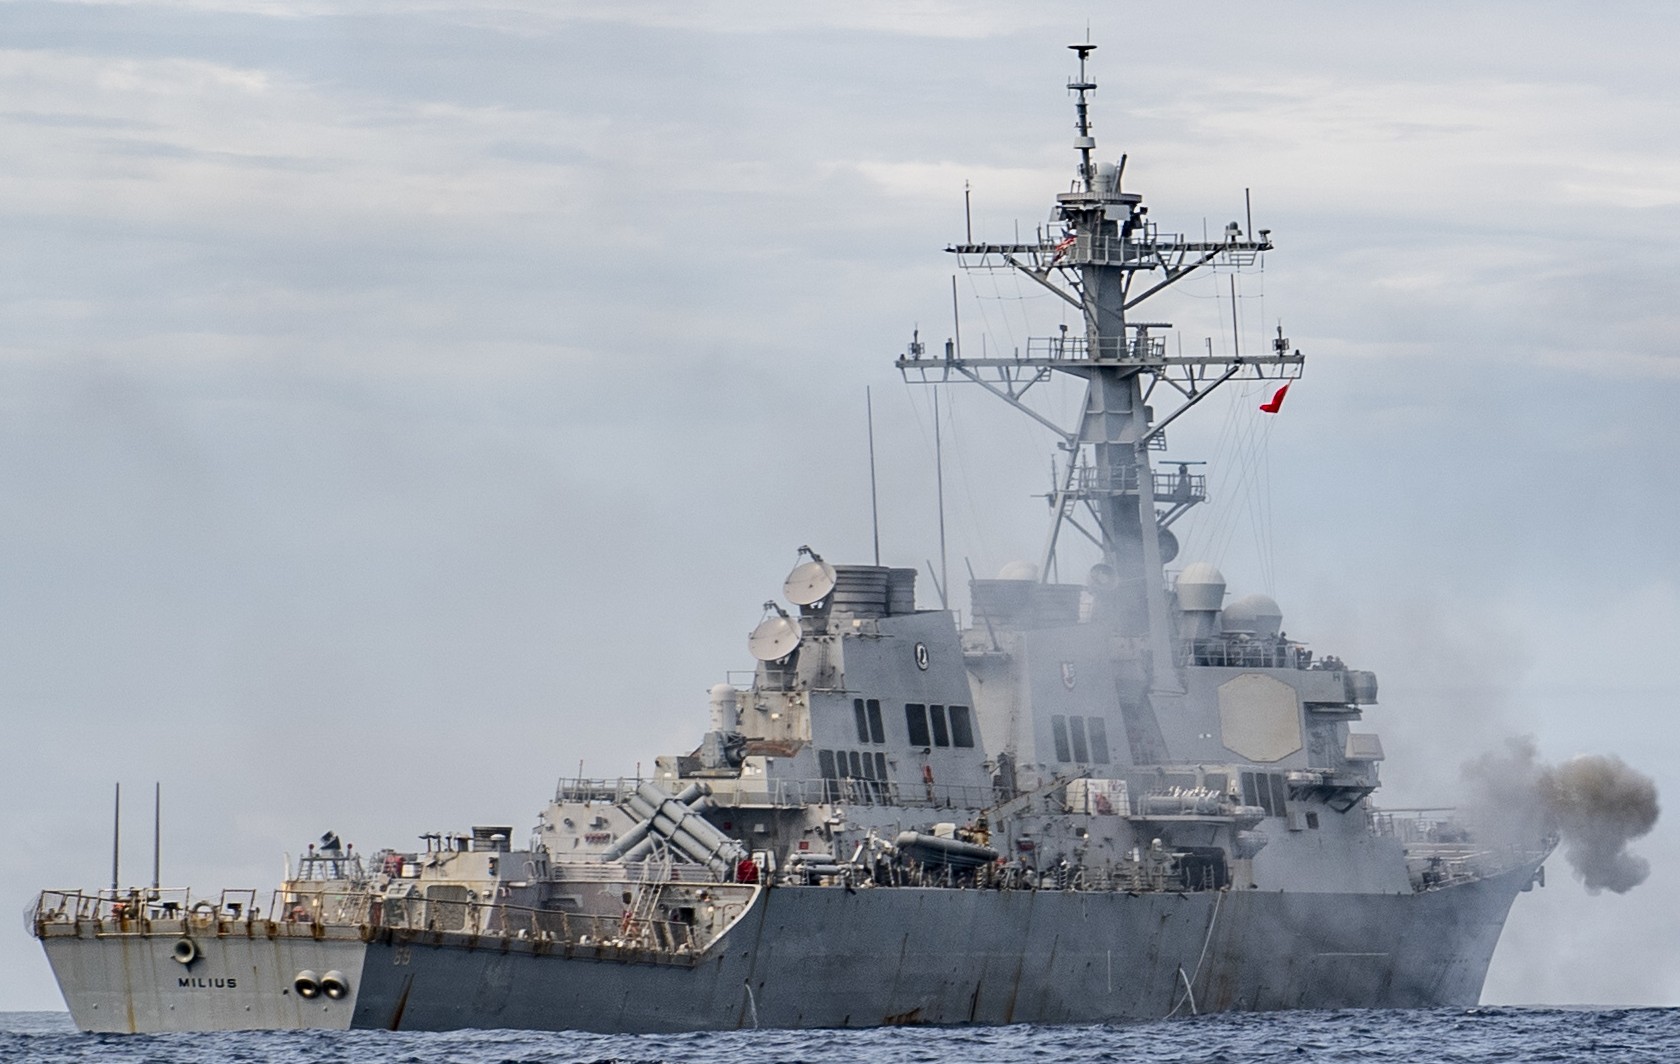 ddg-69 uss milius guided missile destroyer arleigh burke class aegis bmd 02